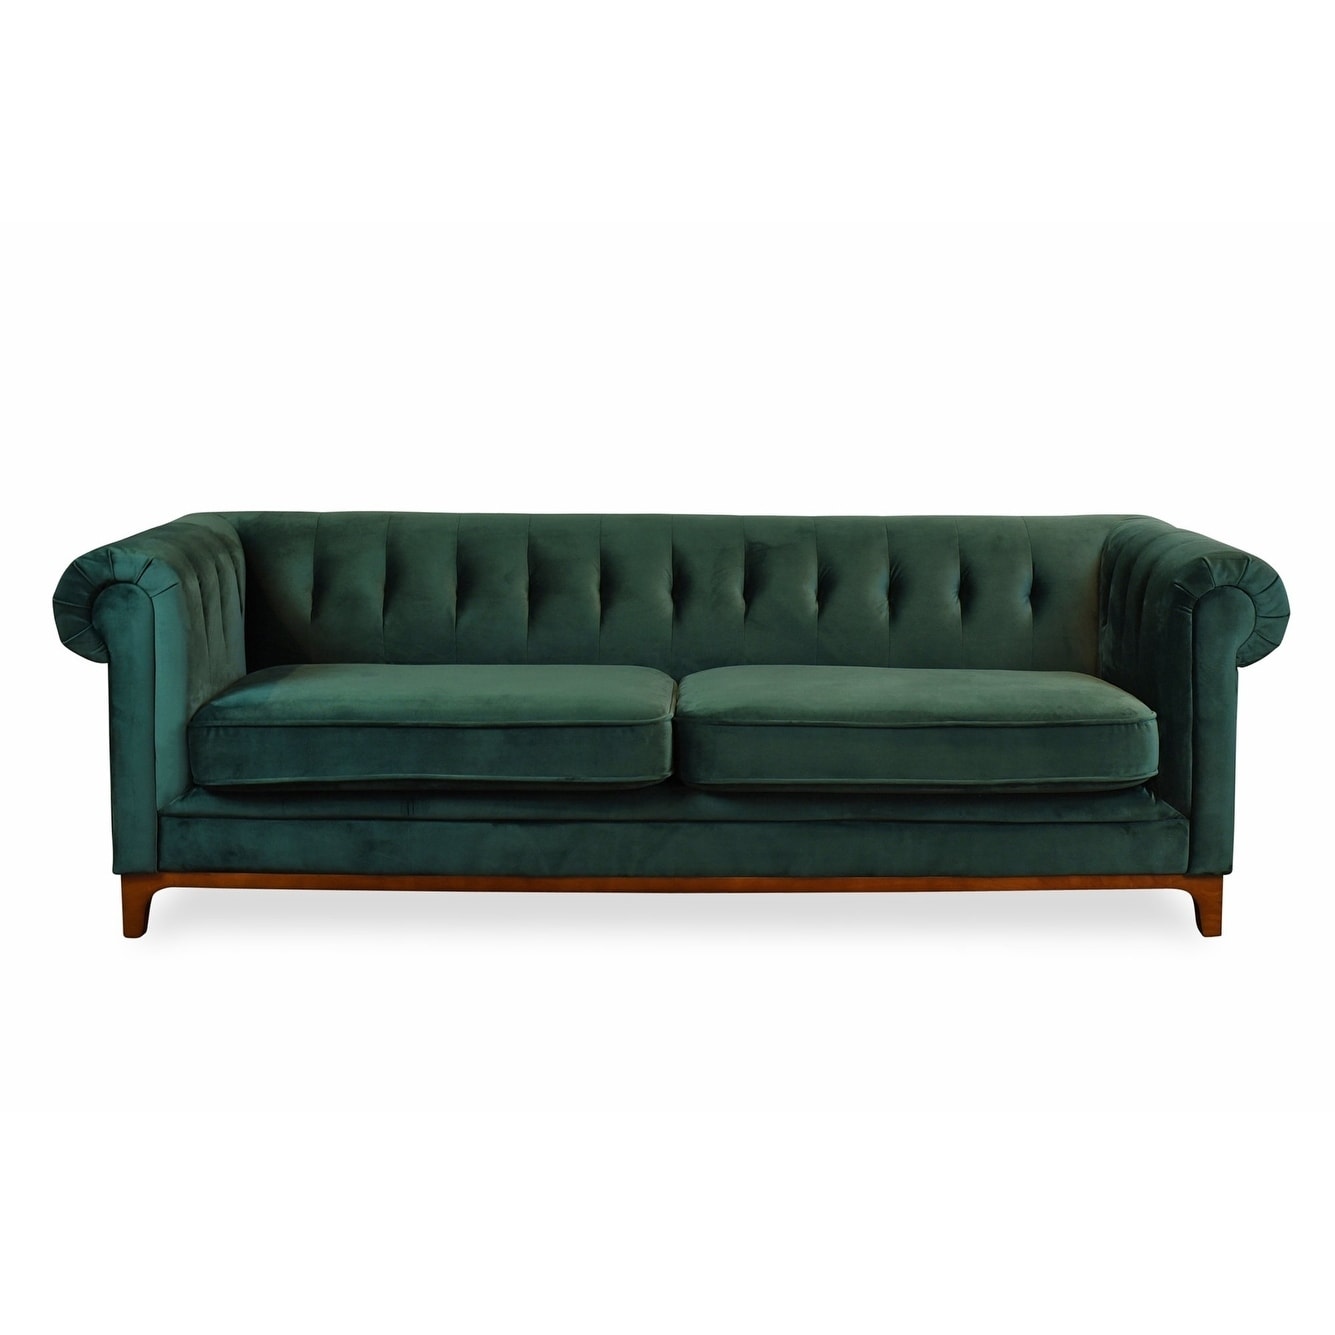 Featured image of post Green Velvet Tufted Couch : Artiss storage ottoman blanket box velvet foot stool rest chest couch toy green.